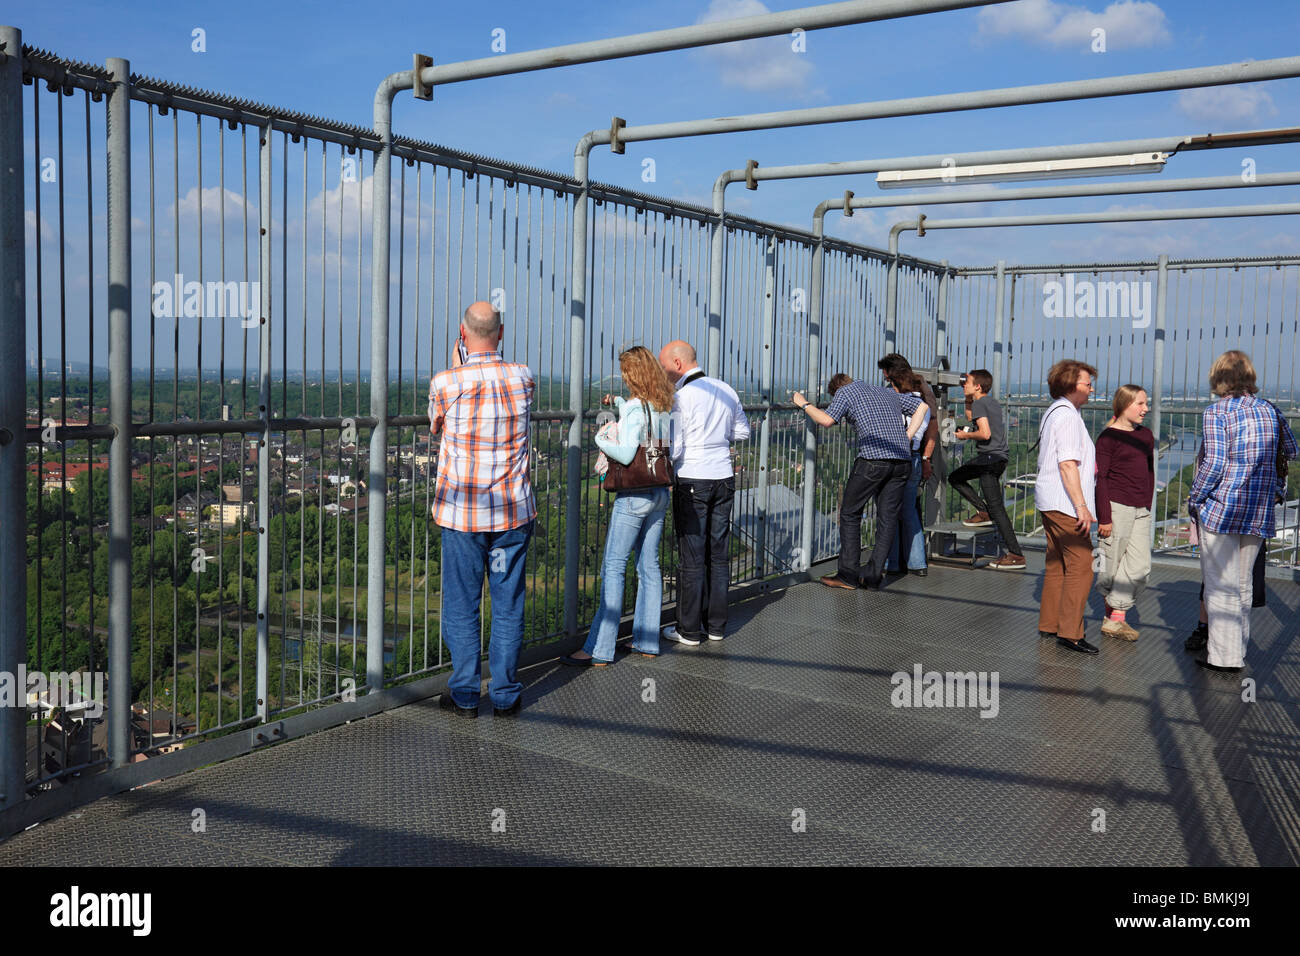 Stehen D High Resolution Stock Photography and Images - Alamy